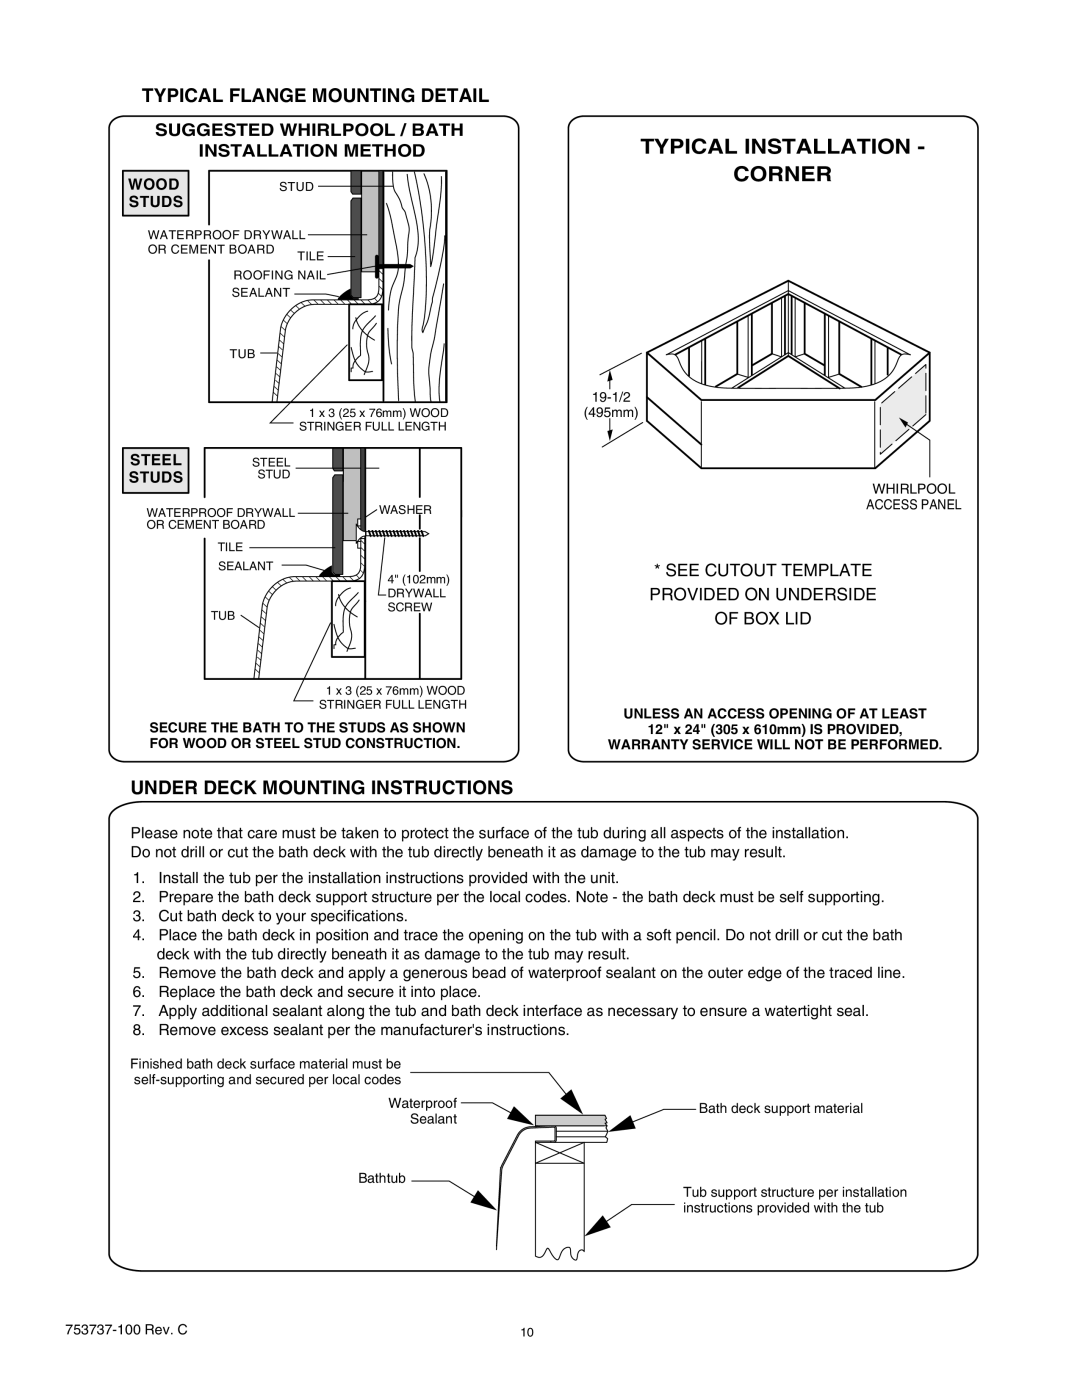 American Standard 2645L Typical Installation Corner, Typical Flange Mounting Detail, Under Deck Mounting Instructions 